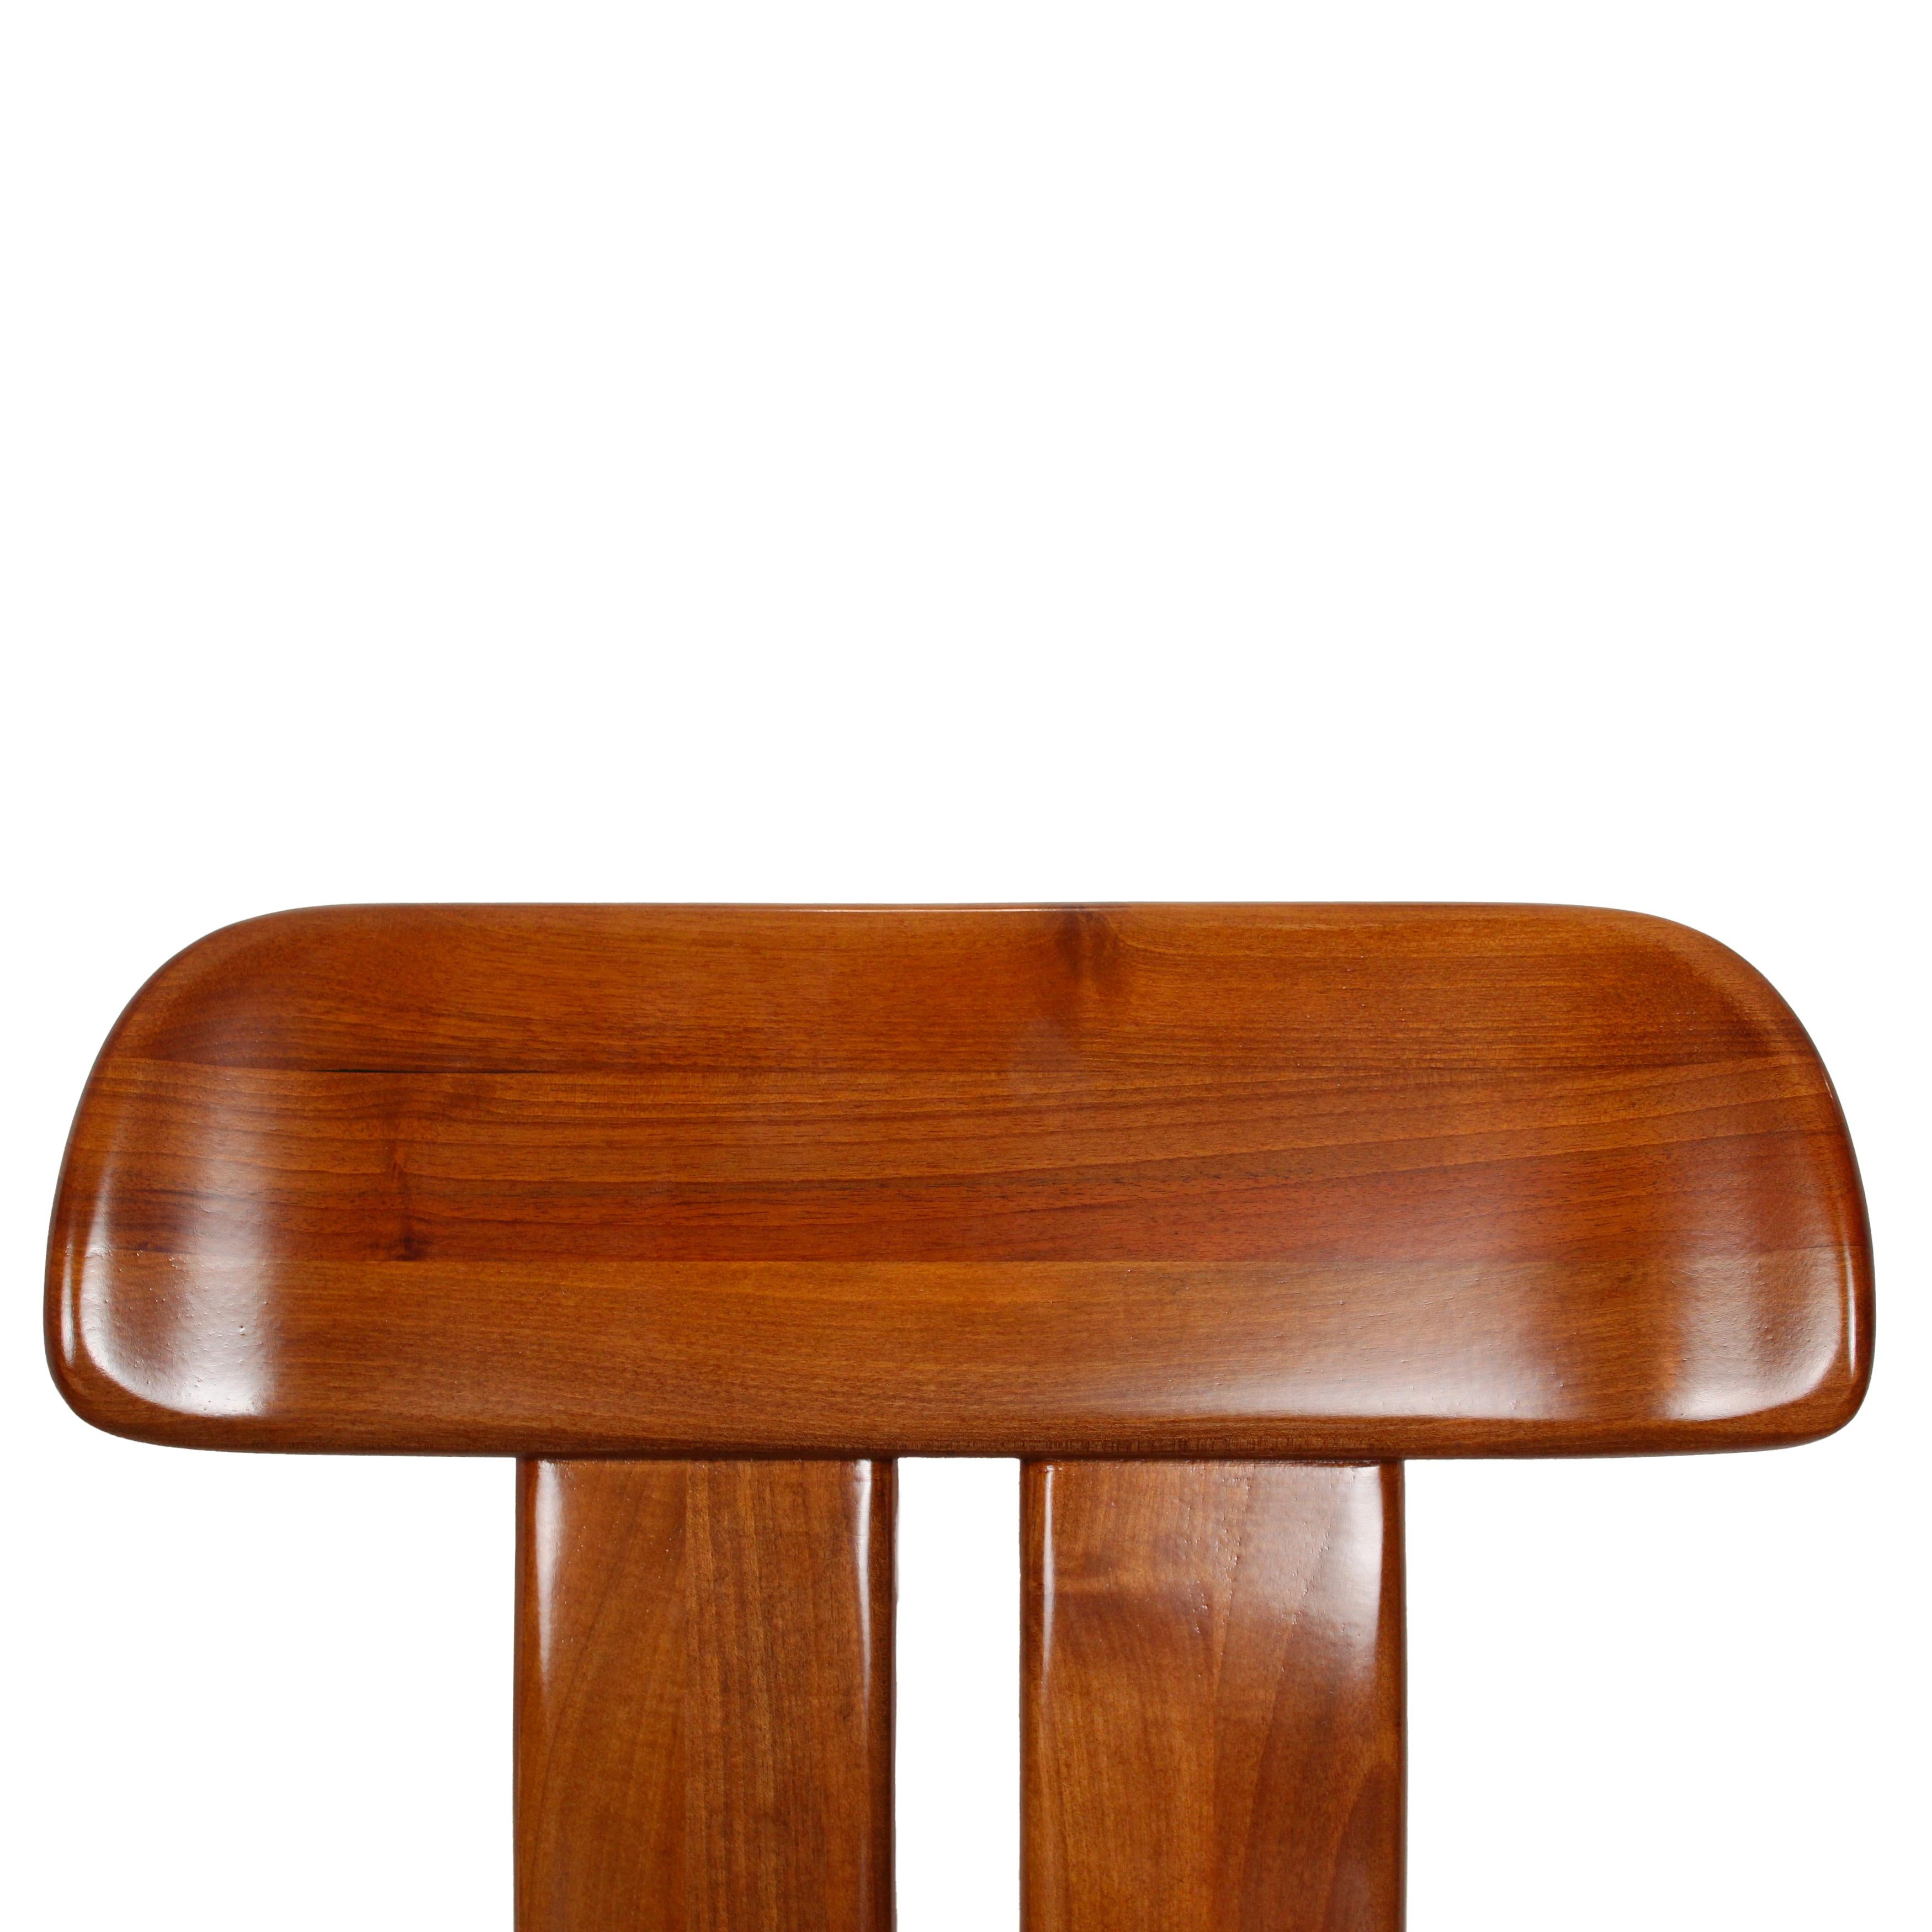 Mario Marenco Walnut Sapporo Dining Chairs for Mobilgirgi, 1970s, Set of 8 For Sale 11